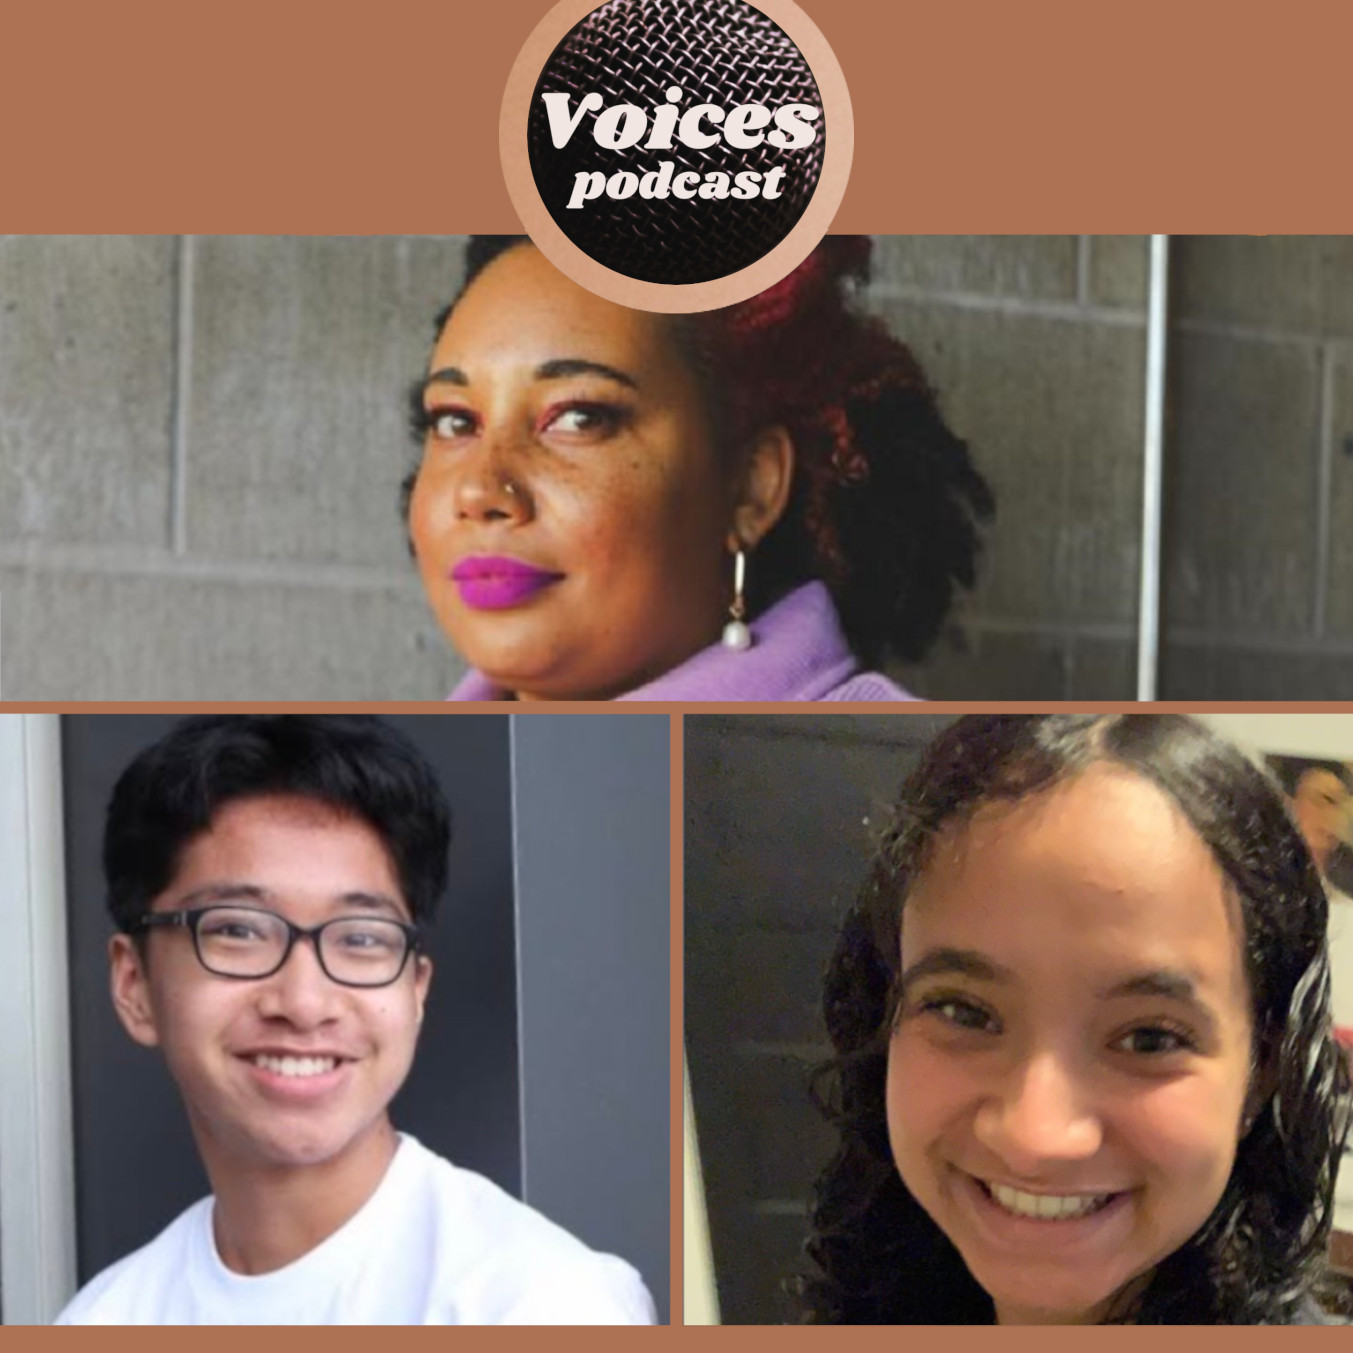 Cicely Belle Blain, and Aaronsaul Negre and Mia Luz Nedellec with the Voices Podcast logo